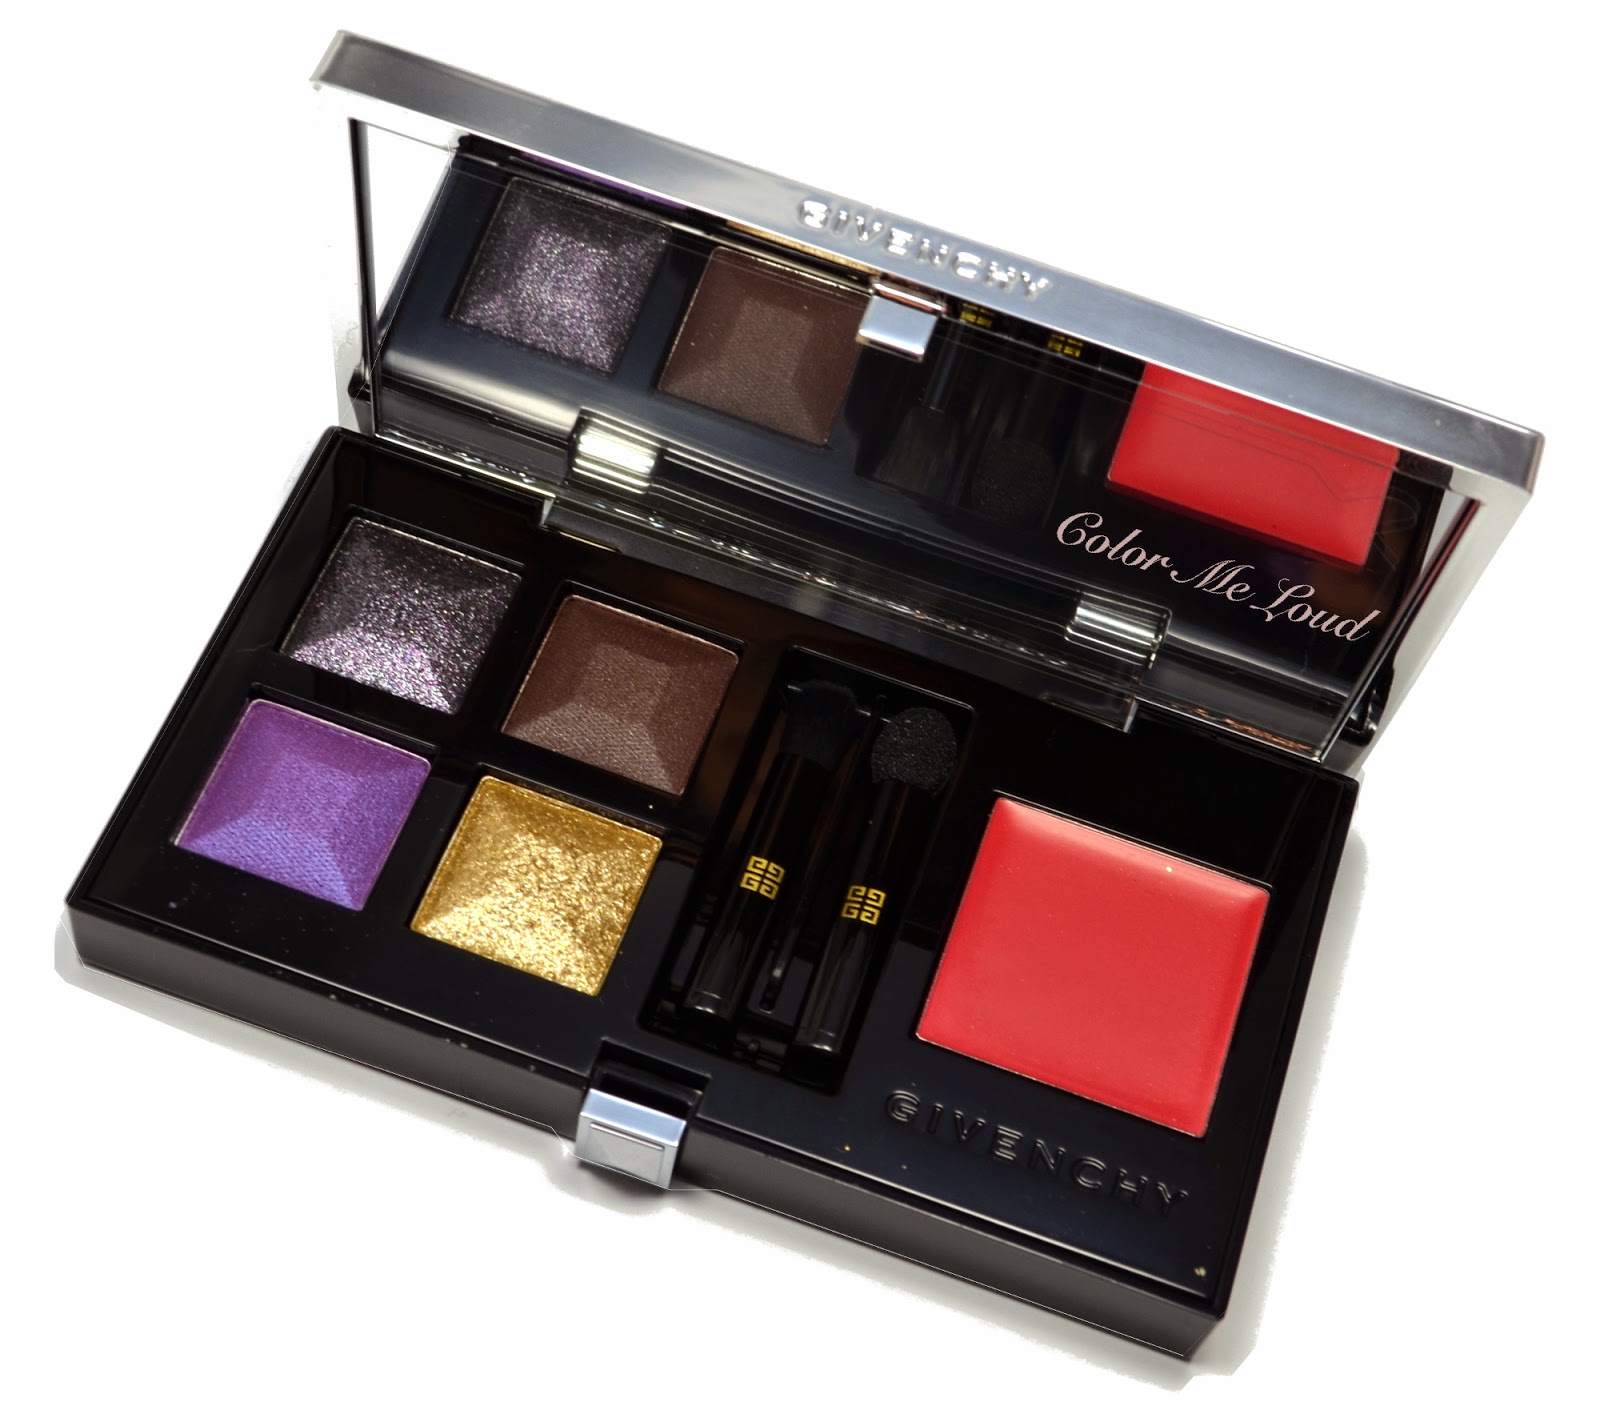 Givenchy Palette Extravagancia Lip & Eye Palette for Fall 2014